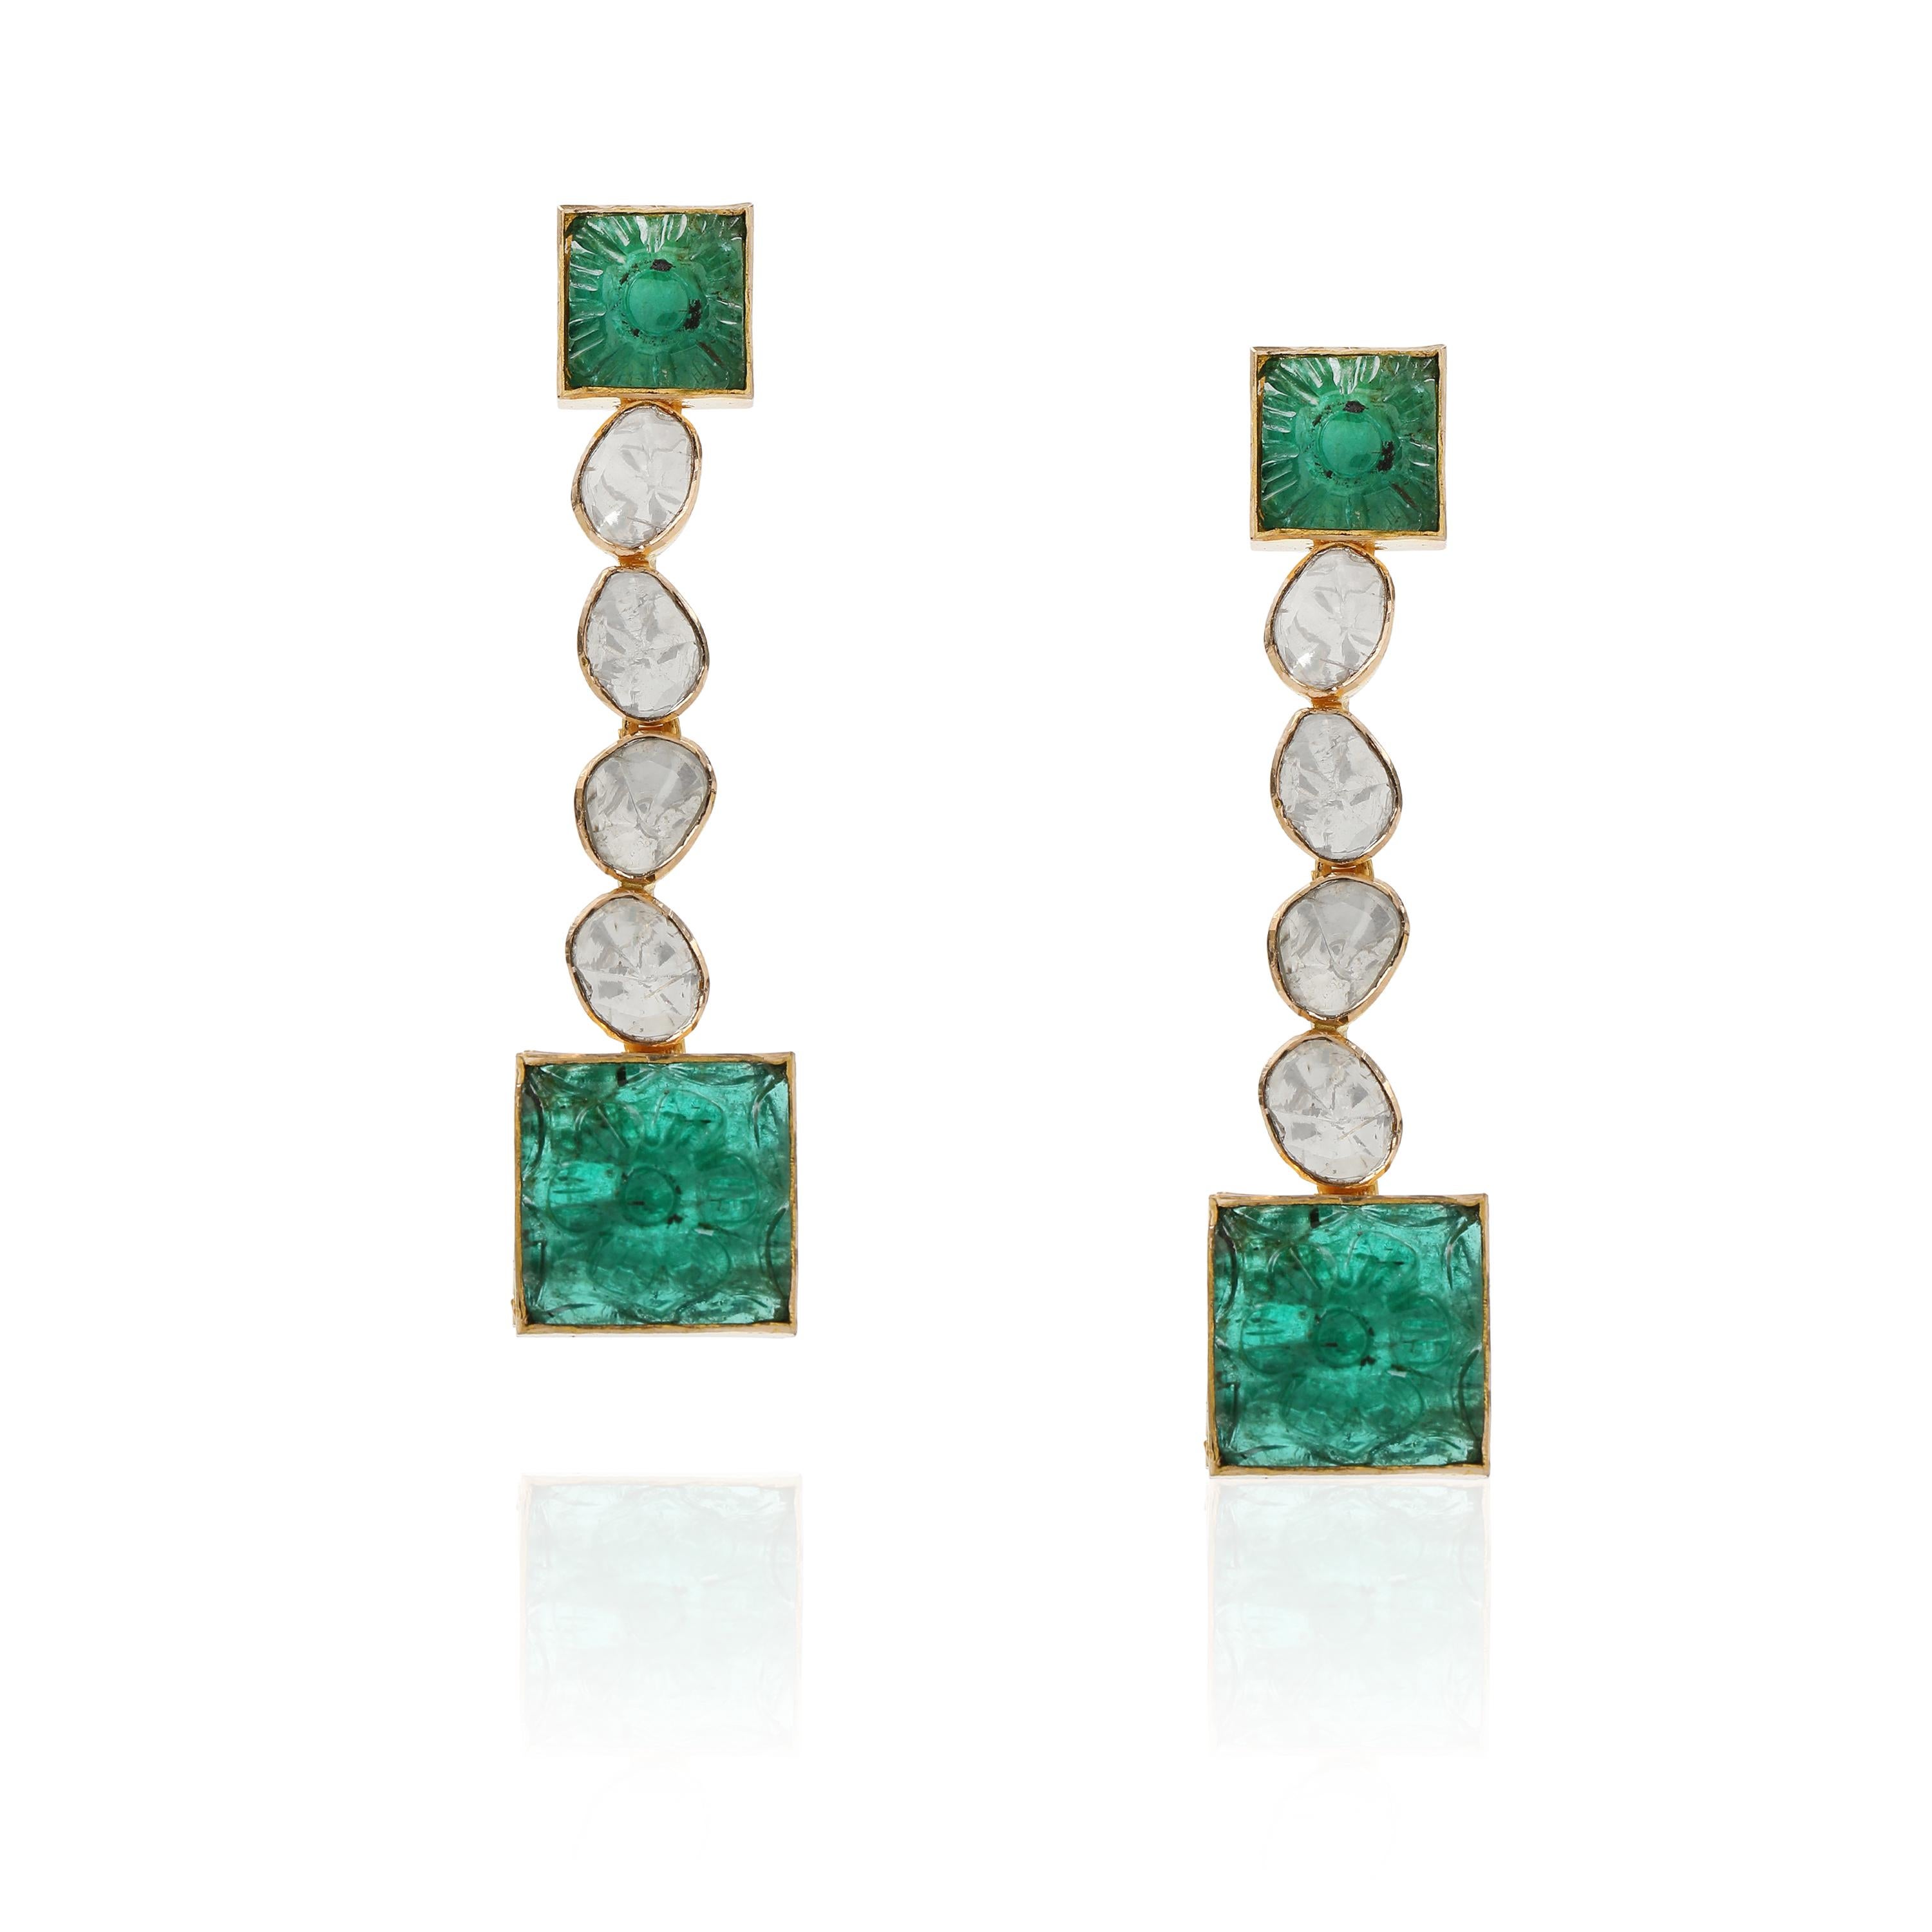 14 Karat Yellow Gold Square Dangle Earrings with Uncut Diamonds and Emerald For Sale 1